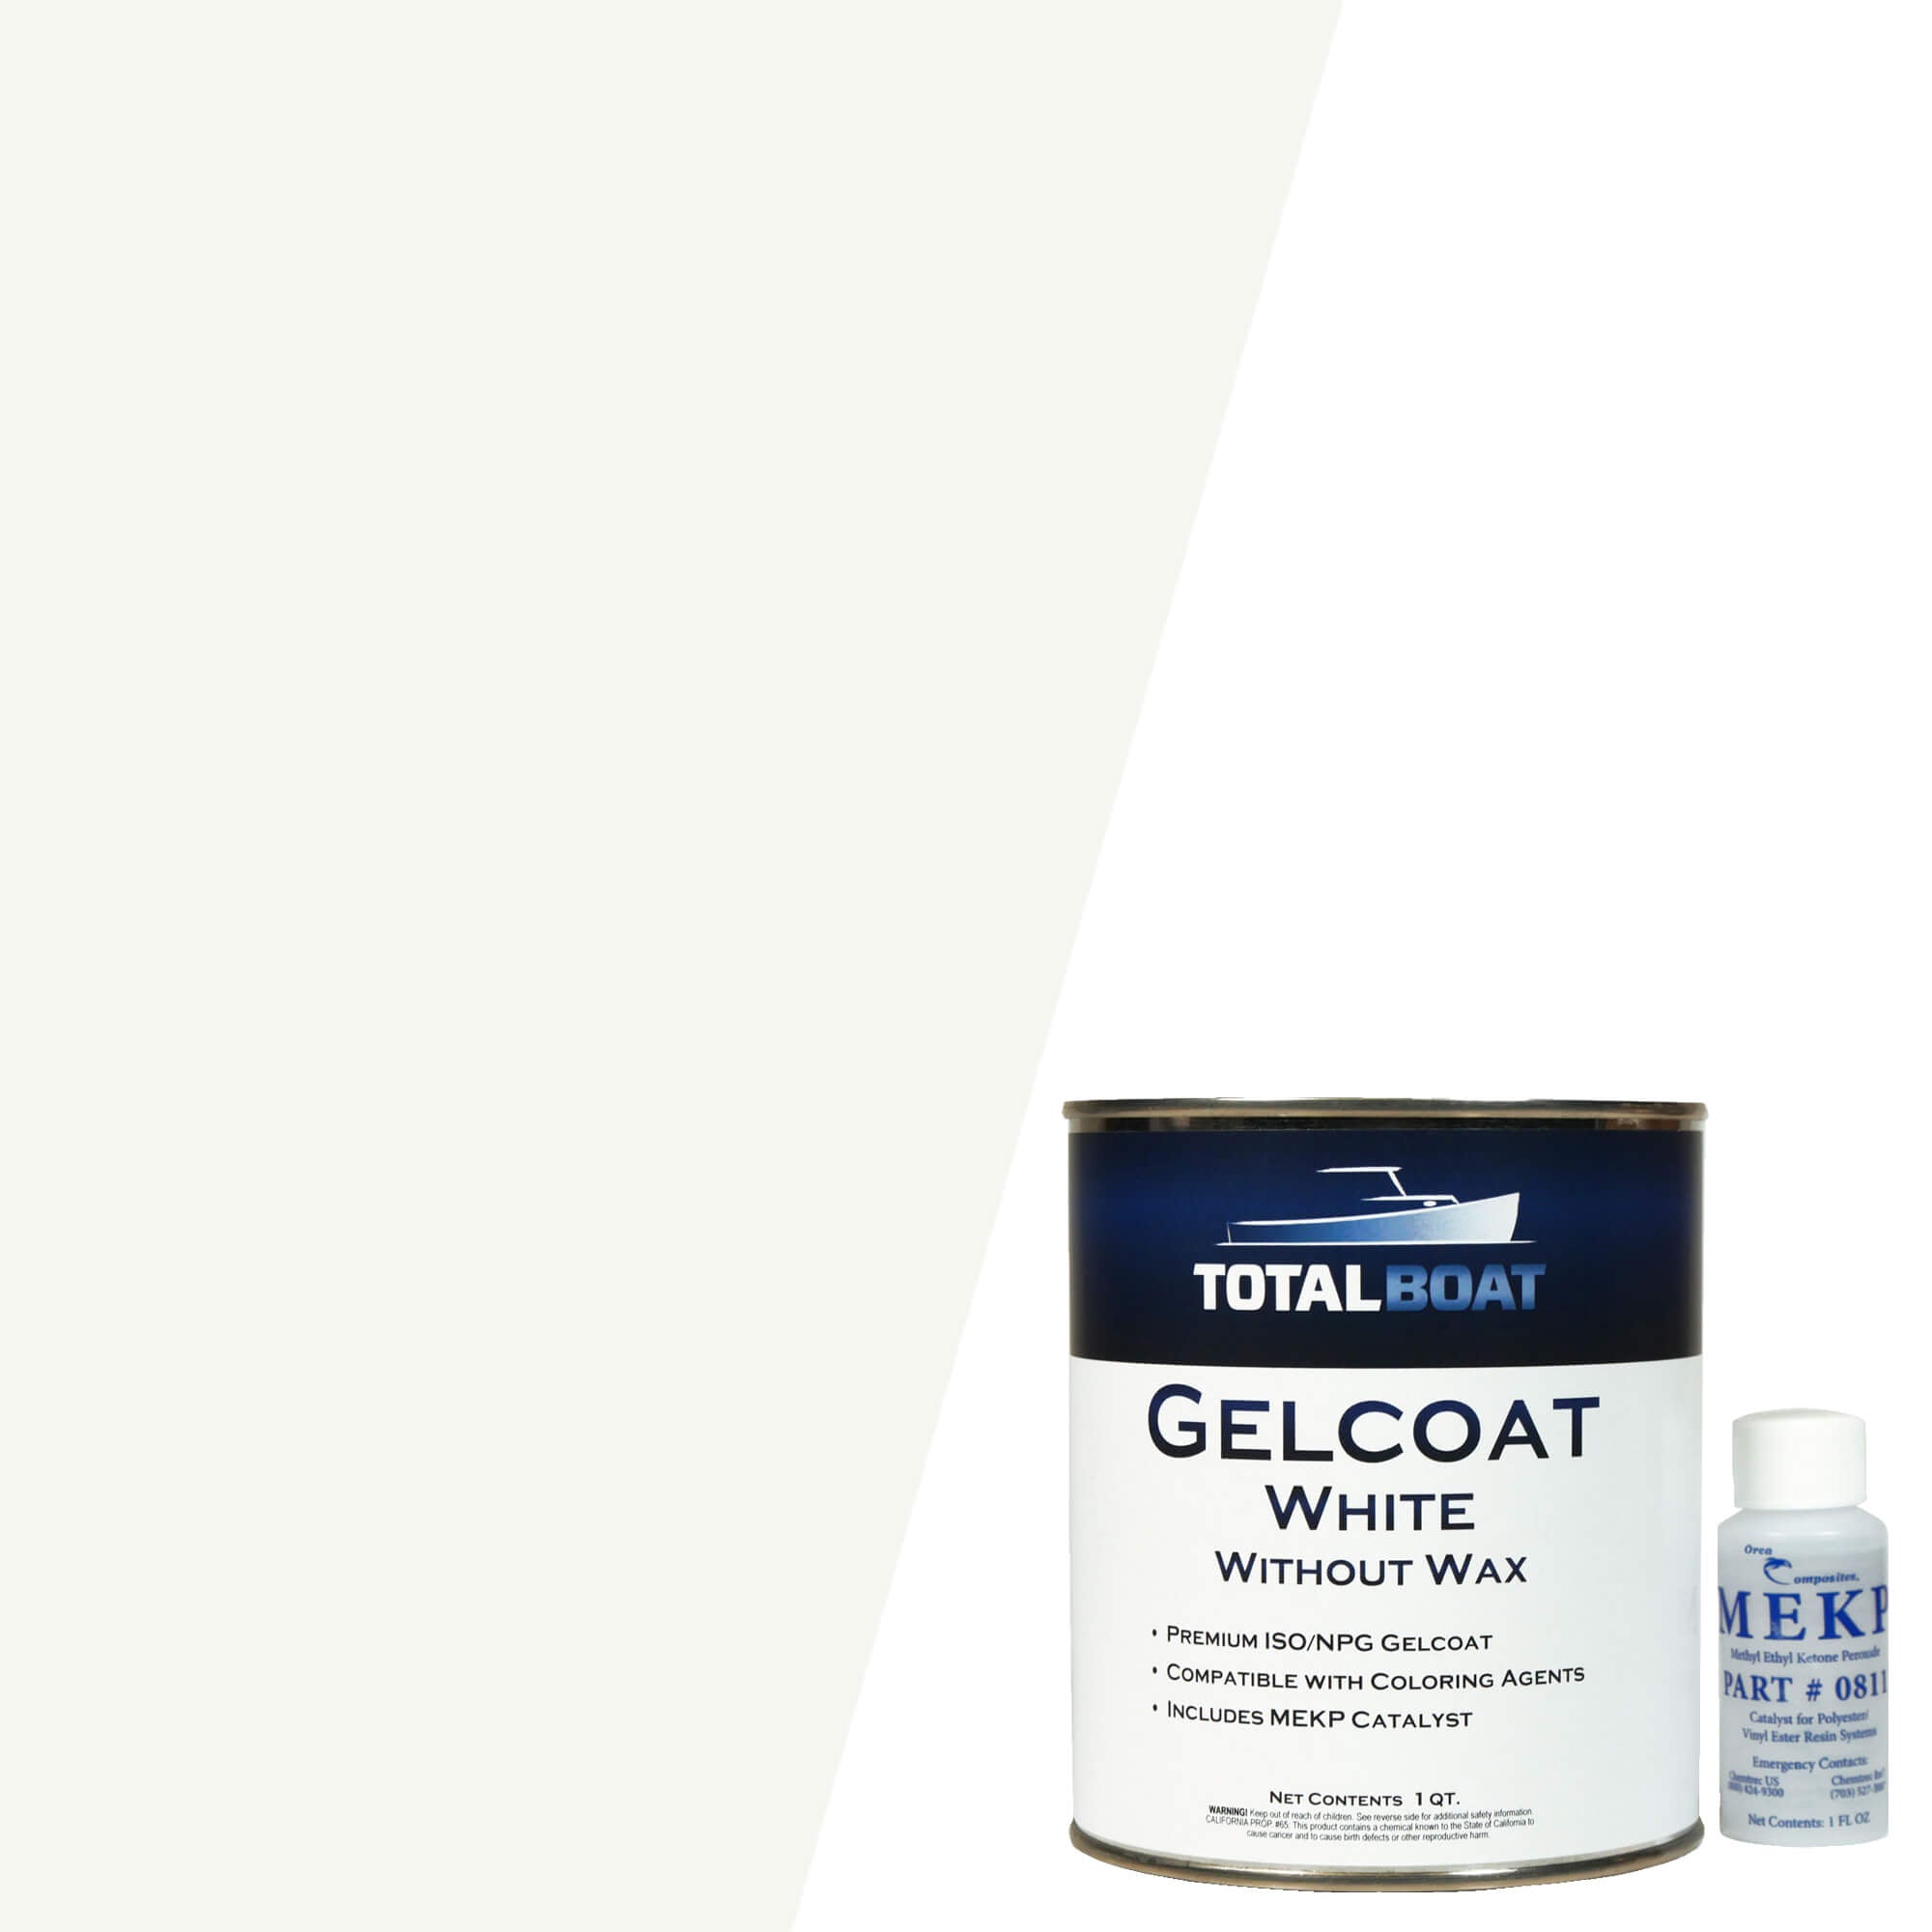 Tips for Spraying Gelcoat from Hold Fast Marine – TotalBoat